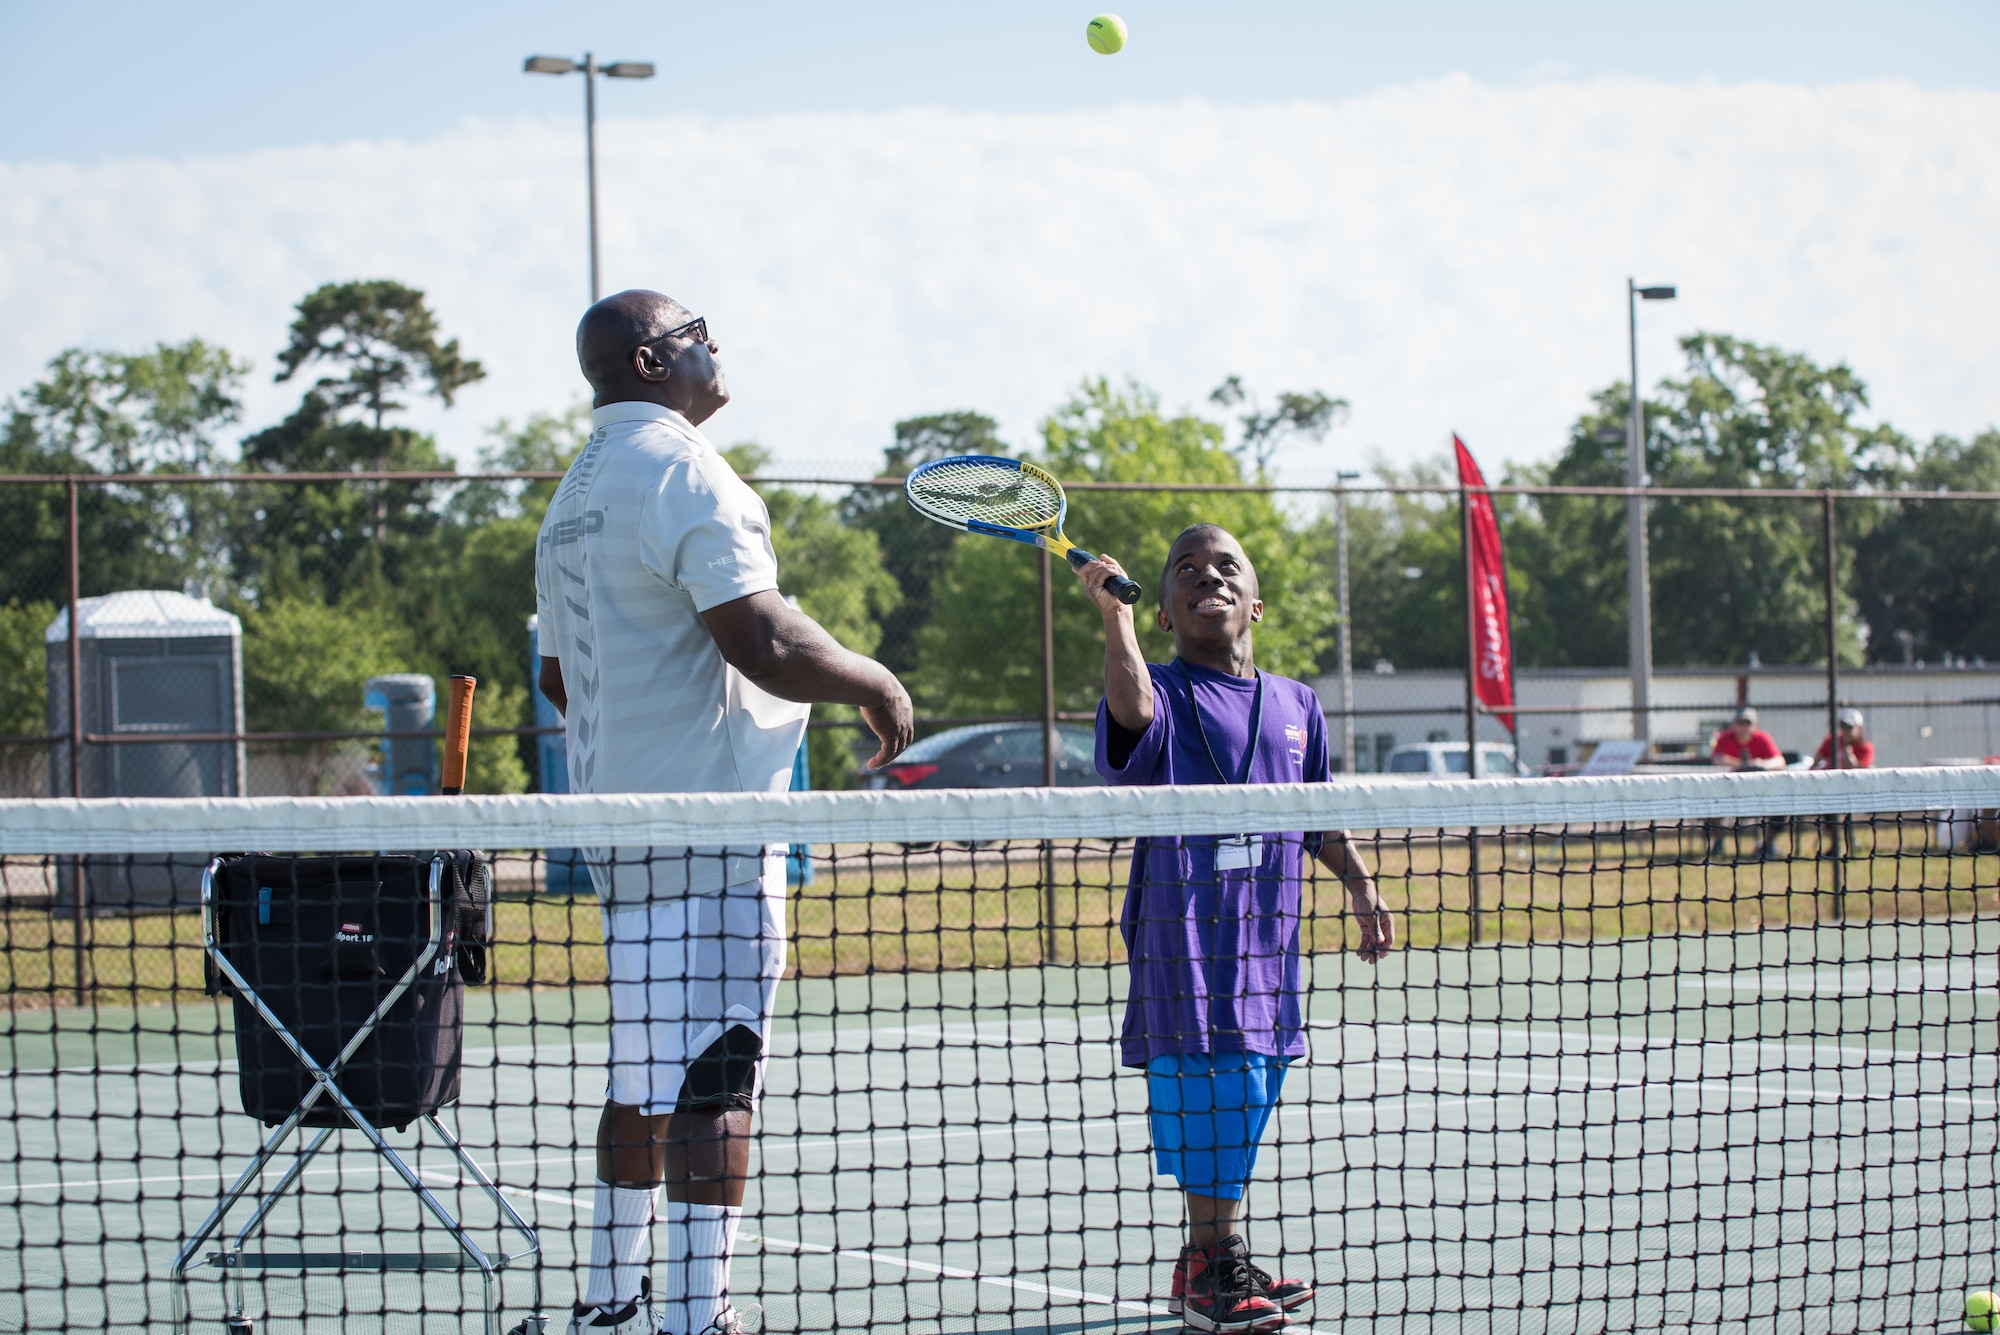 Henry Harris, Special Olympics Mississippi tennis director, tosses a ball to Shaquille Williams, Area 7 athlete, during the Special Olympics Mississippi 2018 Summer Games at the tennis courts at Keesler Air Force Base, Mississippi, May 12, 2018. Founded in 1968, Special Olympics hosts sporting events around the world for people of all ages with special needs to include more than 700 athletes from Mississippi. (U.S. Air Force photo by Andre' Askew)